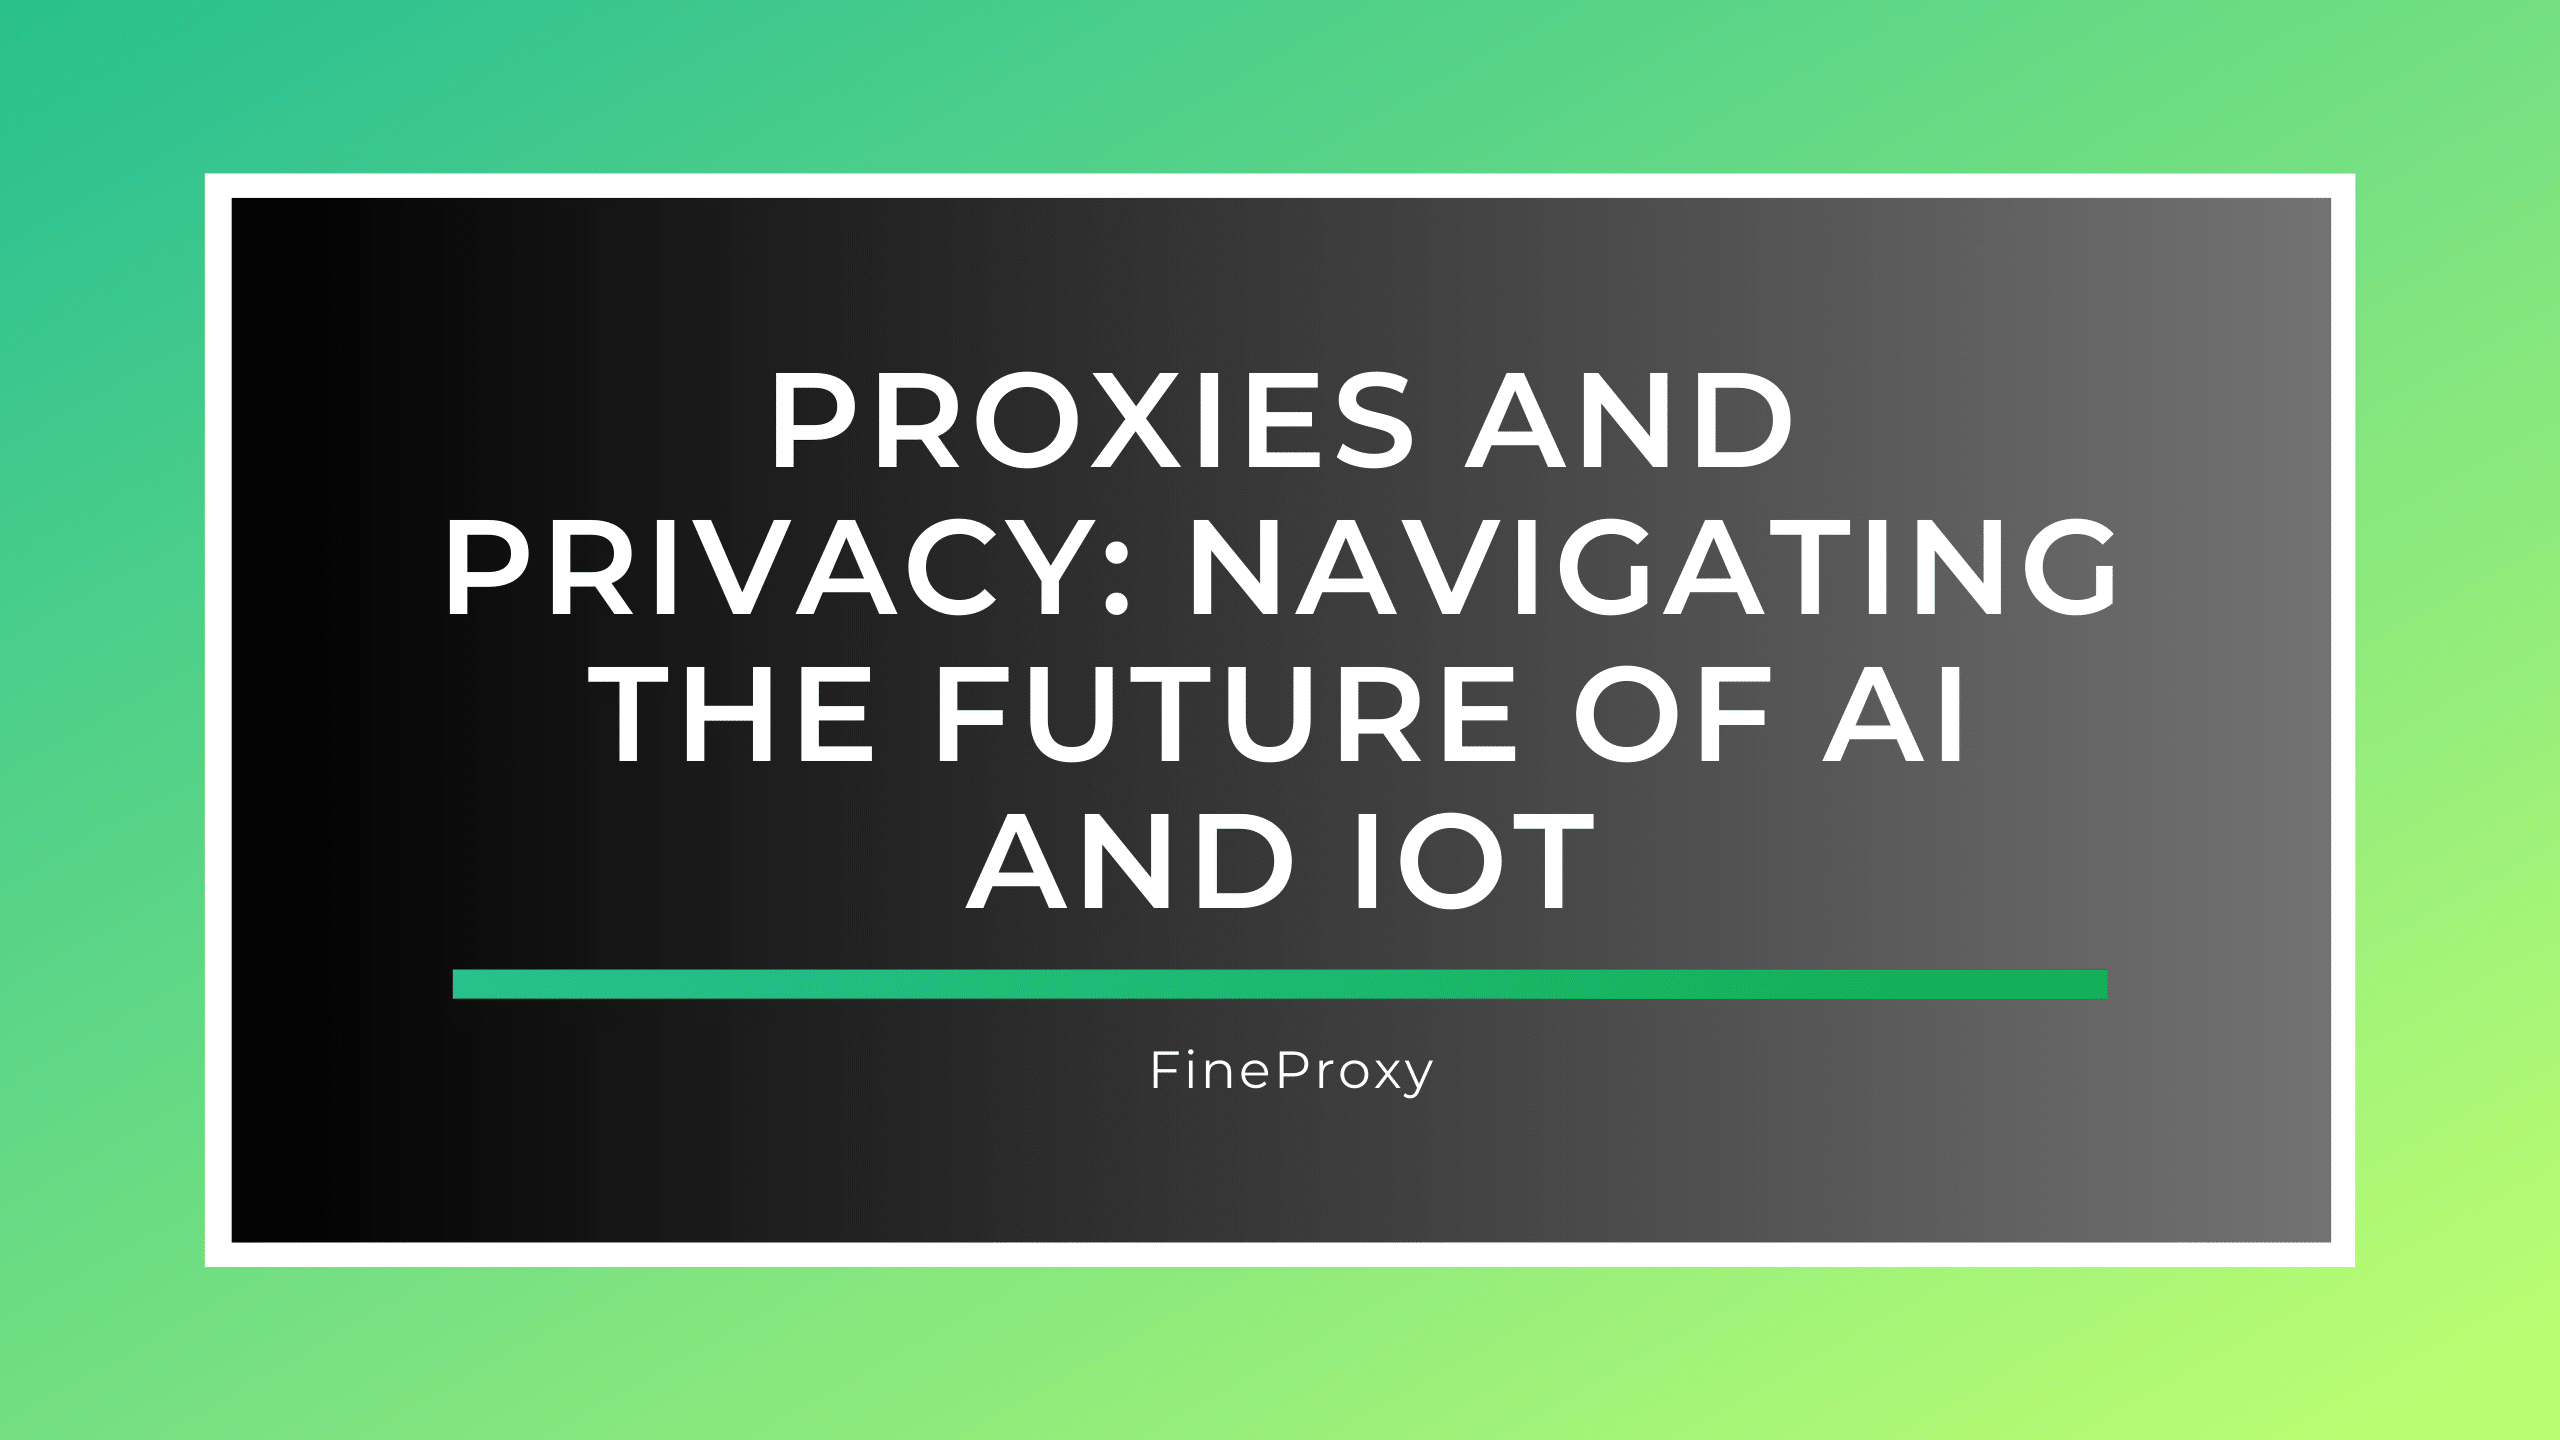 Proxies and Privacy: Navigating the Future of AI and IoT